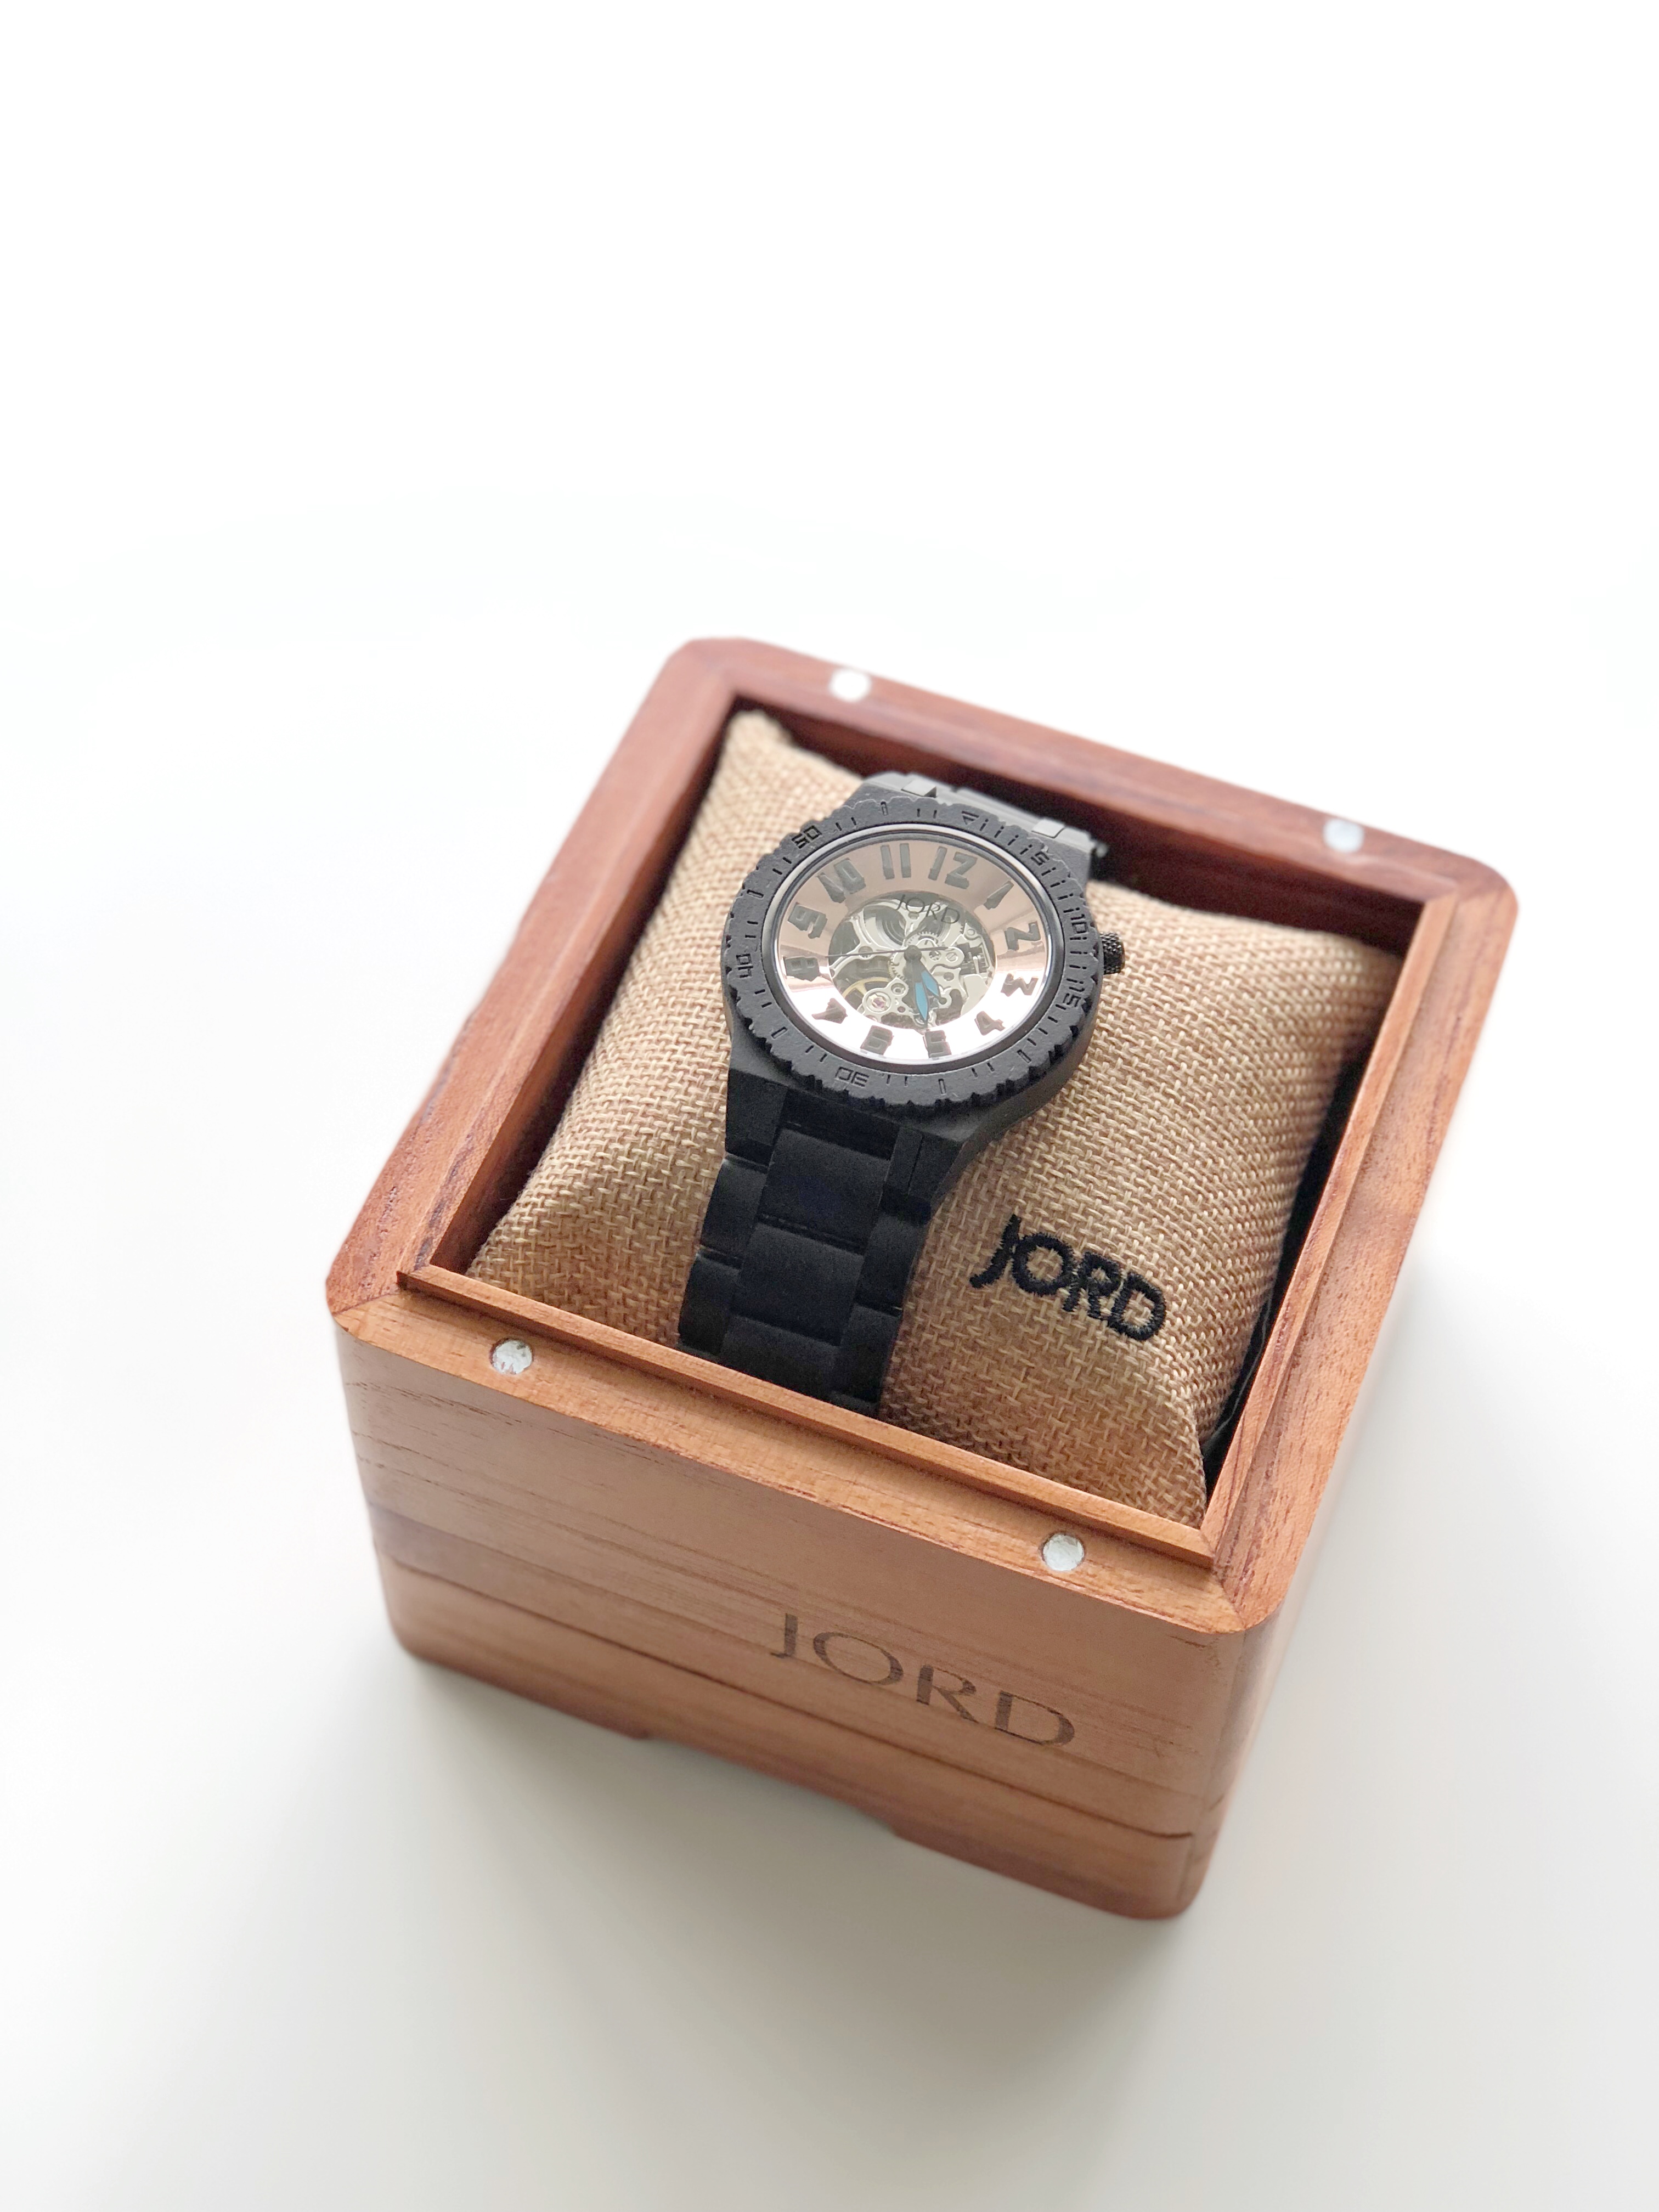 http://www.jordwatches.com/#bethalylovebeauty JORD wooden watches | wooden watches | the perfect gift | the best wooden watches | the best watches for men | the best watches for women | luxury watches | luxury wood watches | spring fashion accessories | men's accessories | JORD wooden watches for men | JORD wooden watches for women | bethalylovebeauty.com | unique timepieces for men | unique time pieces for women | unique wooden watches